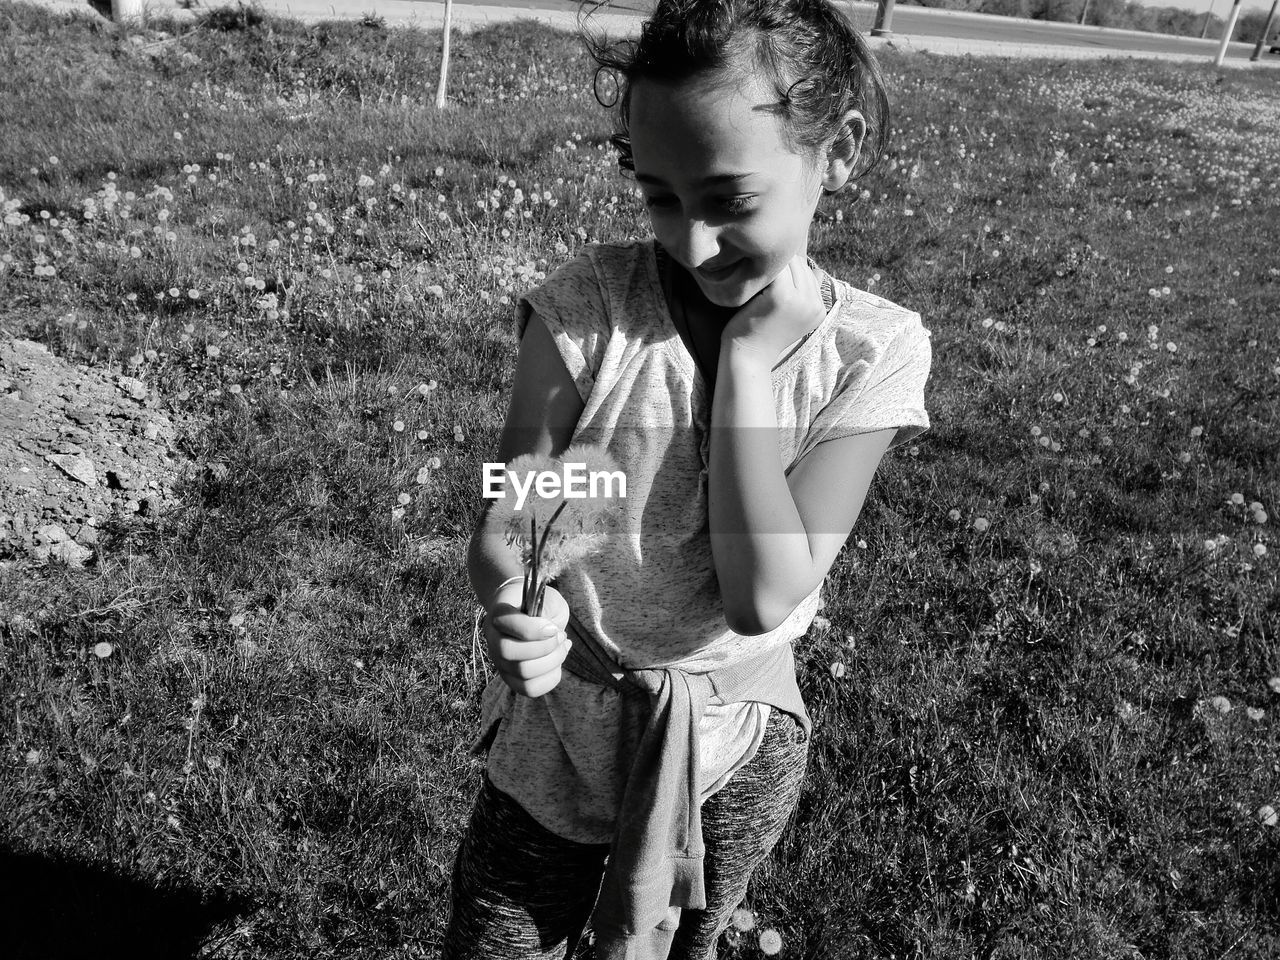 Smiling girl holding dandelions while standing on field